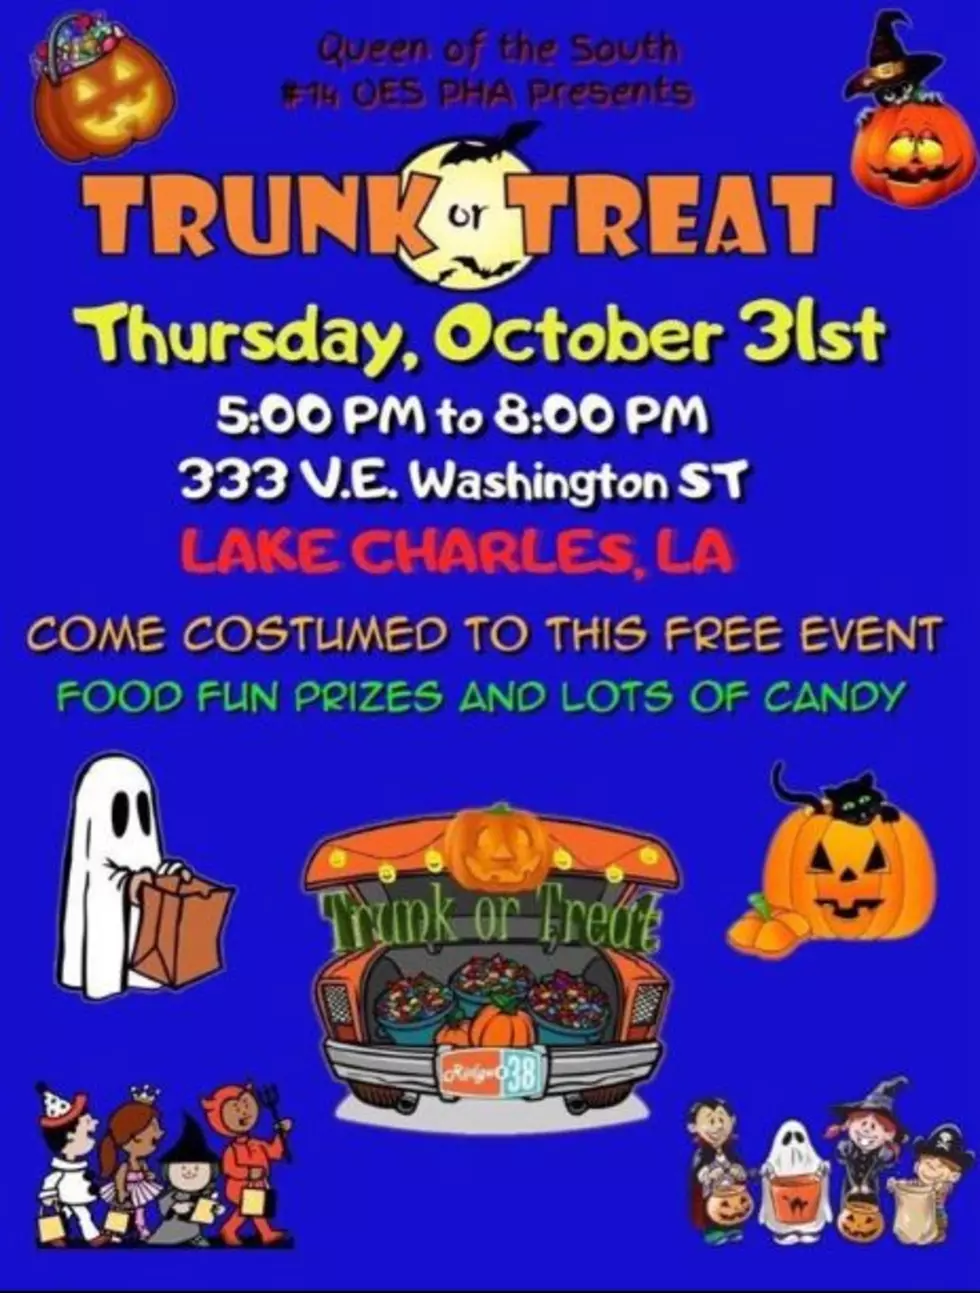 Queen Of The South #14 Presents Trunk Or Treat 2019